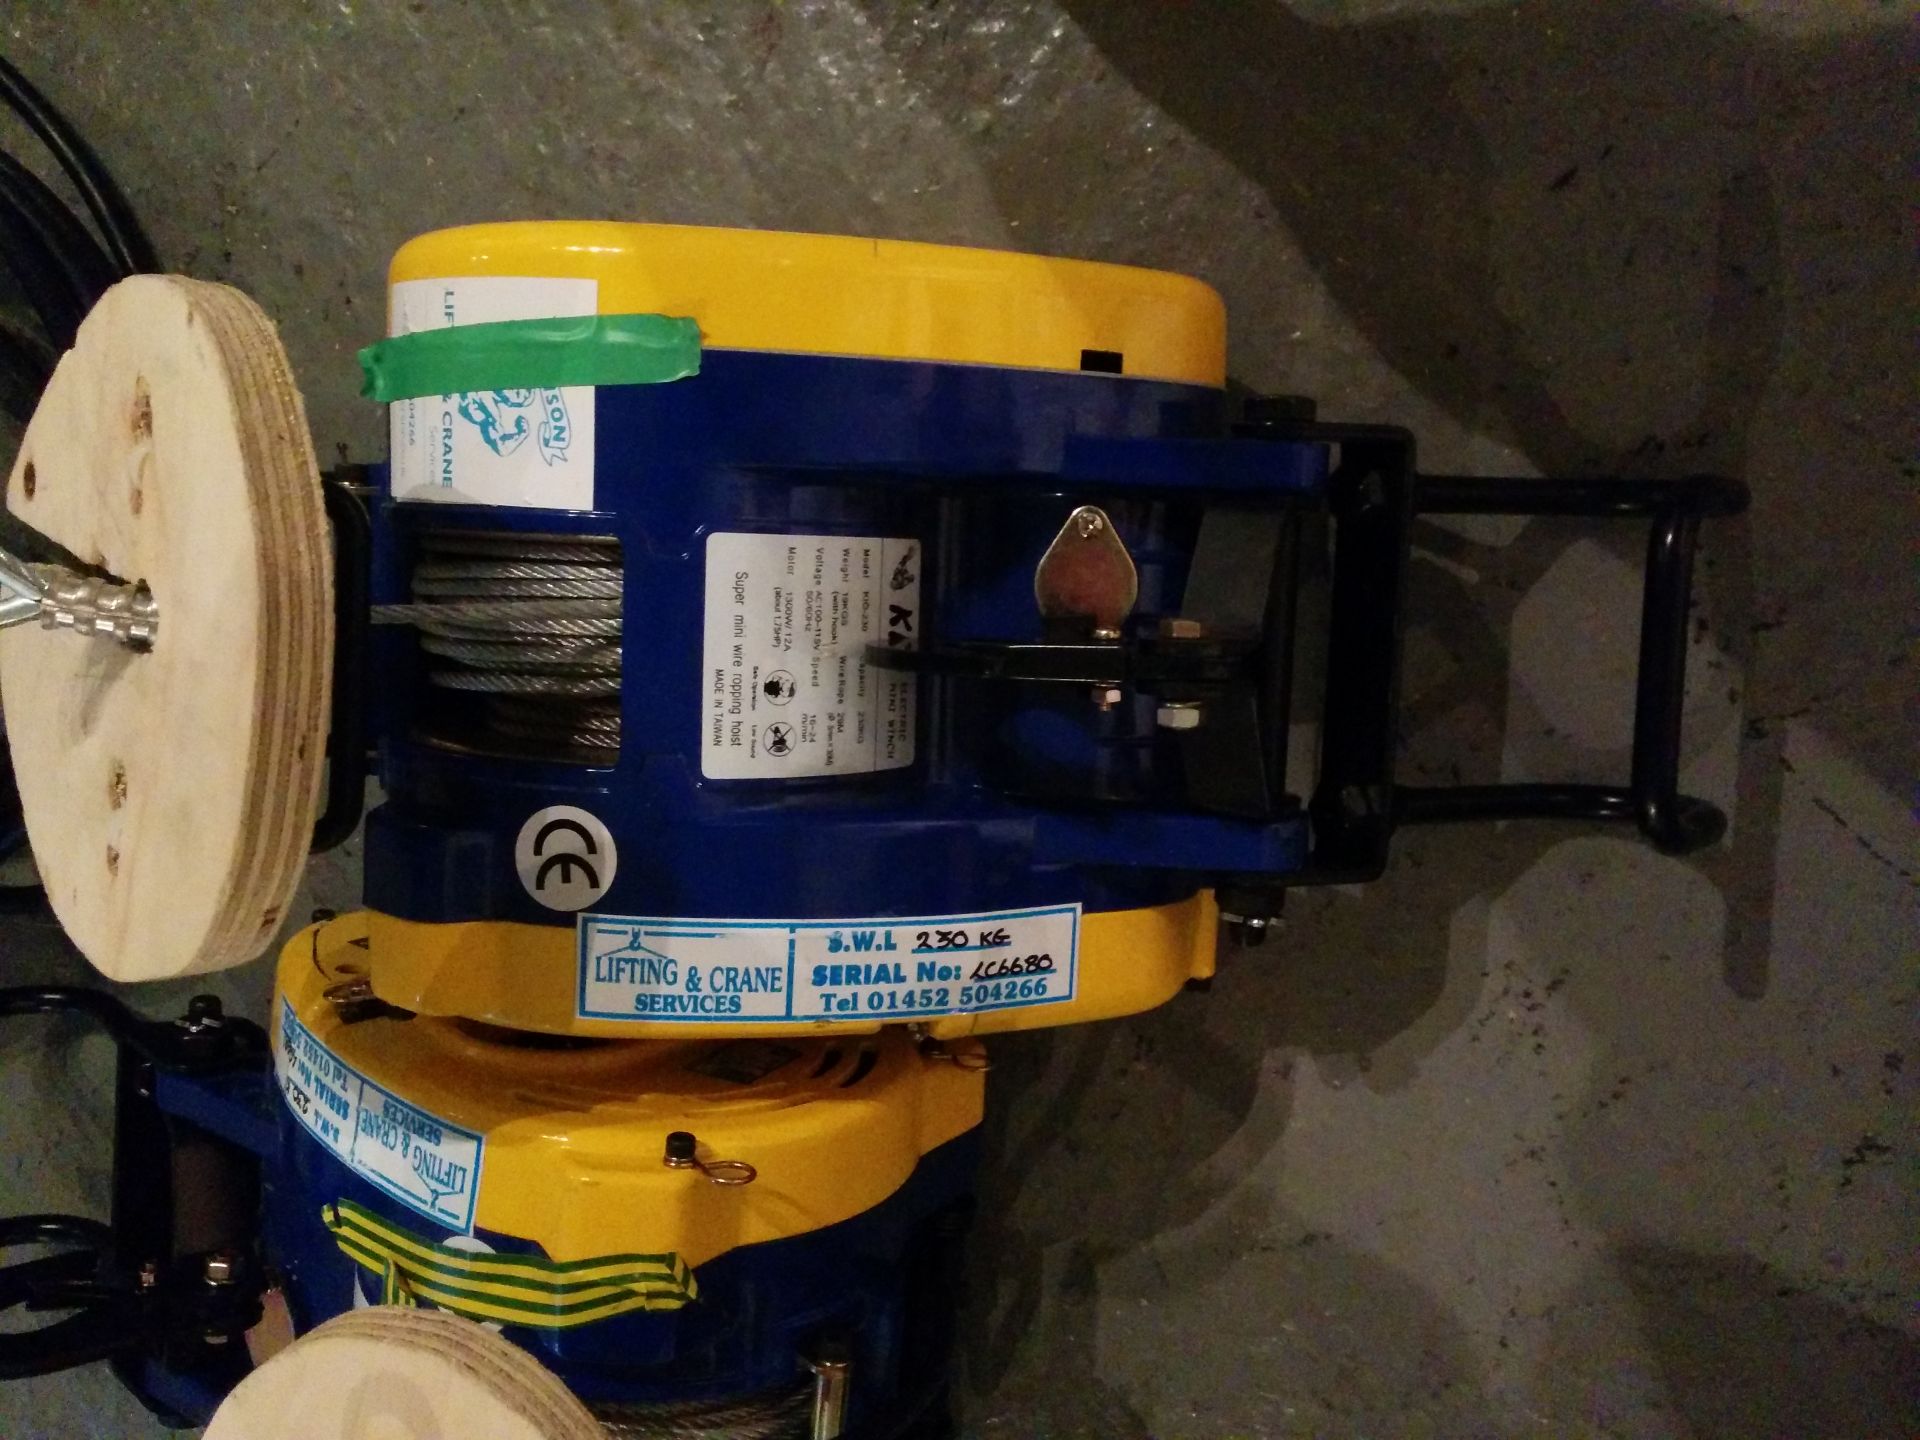 Winches Kio Mini 110V with max load 230 KG - Quantity 4 Condition used - working - RPR £ 400 each - Image 2 of 2